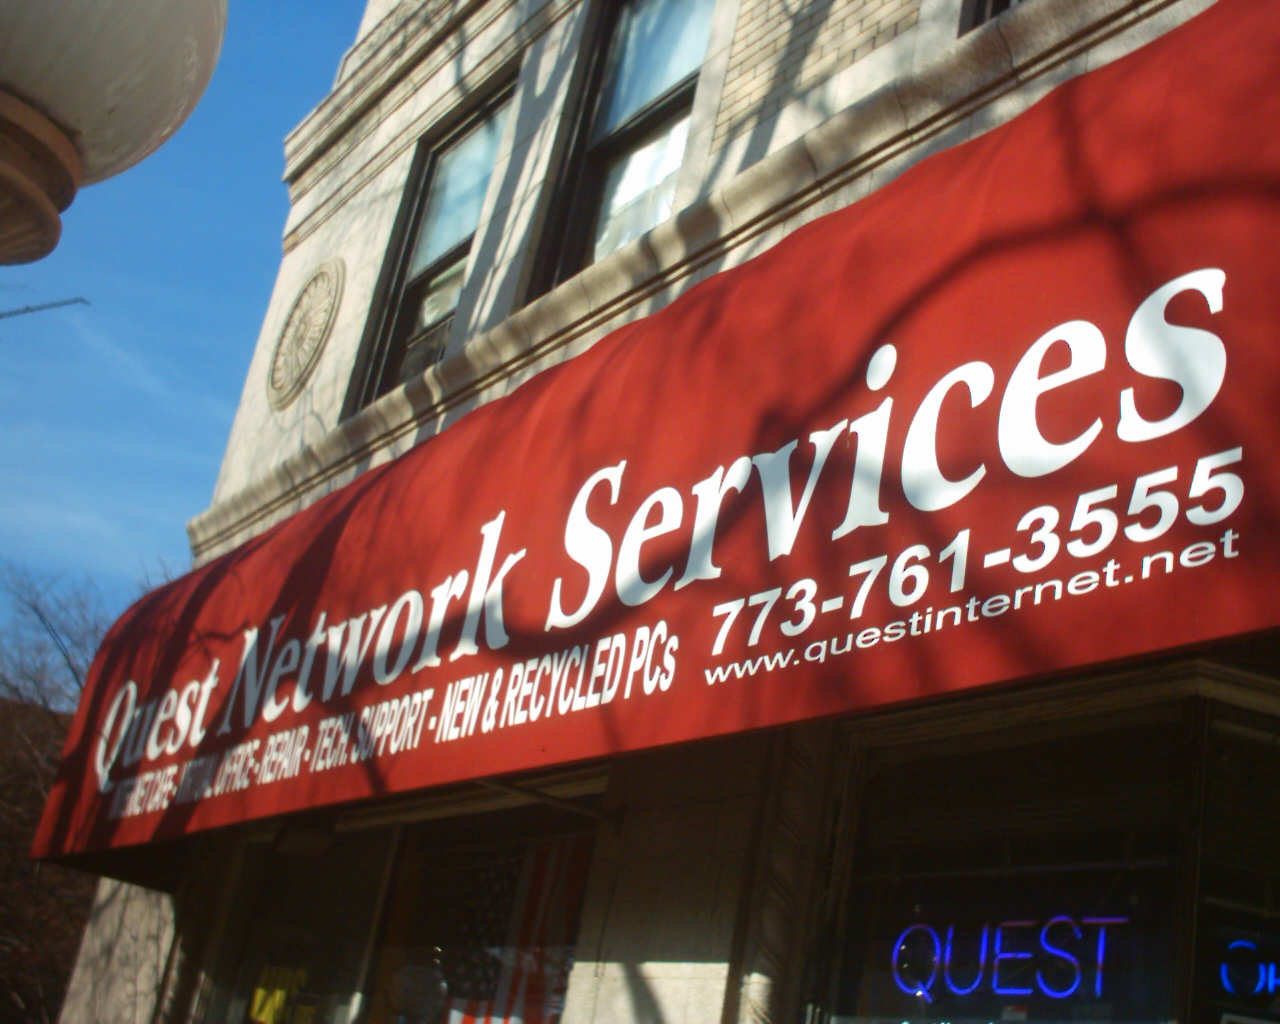 [Quest+Network+Services.JPG]